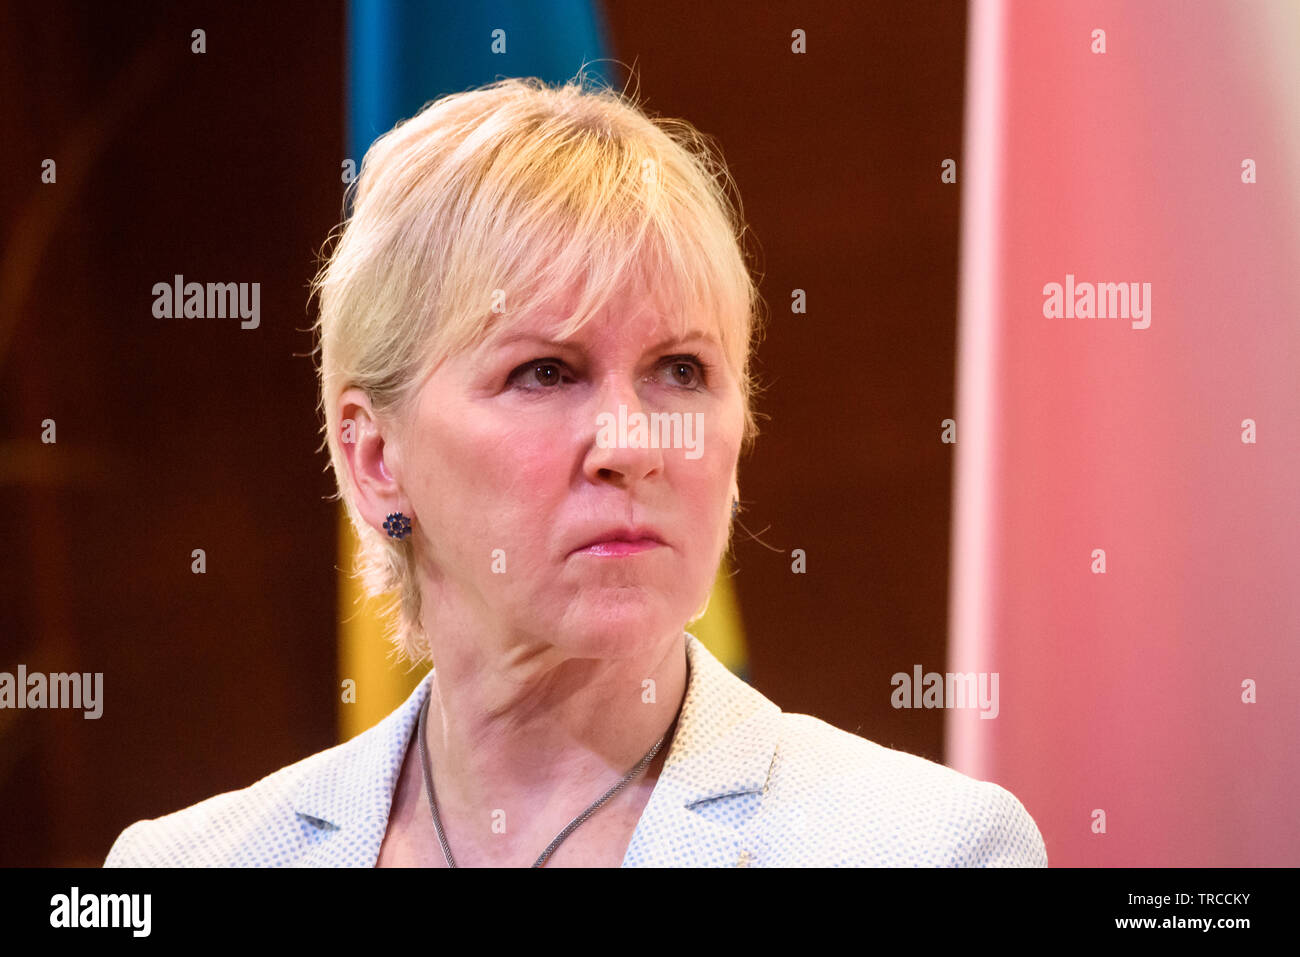 JURMALA, Latvia. , . Margot Wallstrom, Minister of Foreign Affairs of Sweden, during Press conference aftter High-level meeting of the Latvian Presidency of the Council of the Baltic Sea States (CBSS) in Jurmala, Latvia. Credit: Gints Ivuskans/Alamy Live News Stock Photo